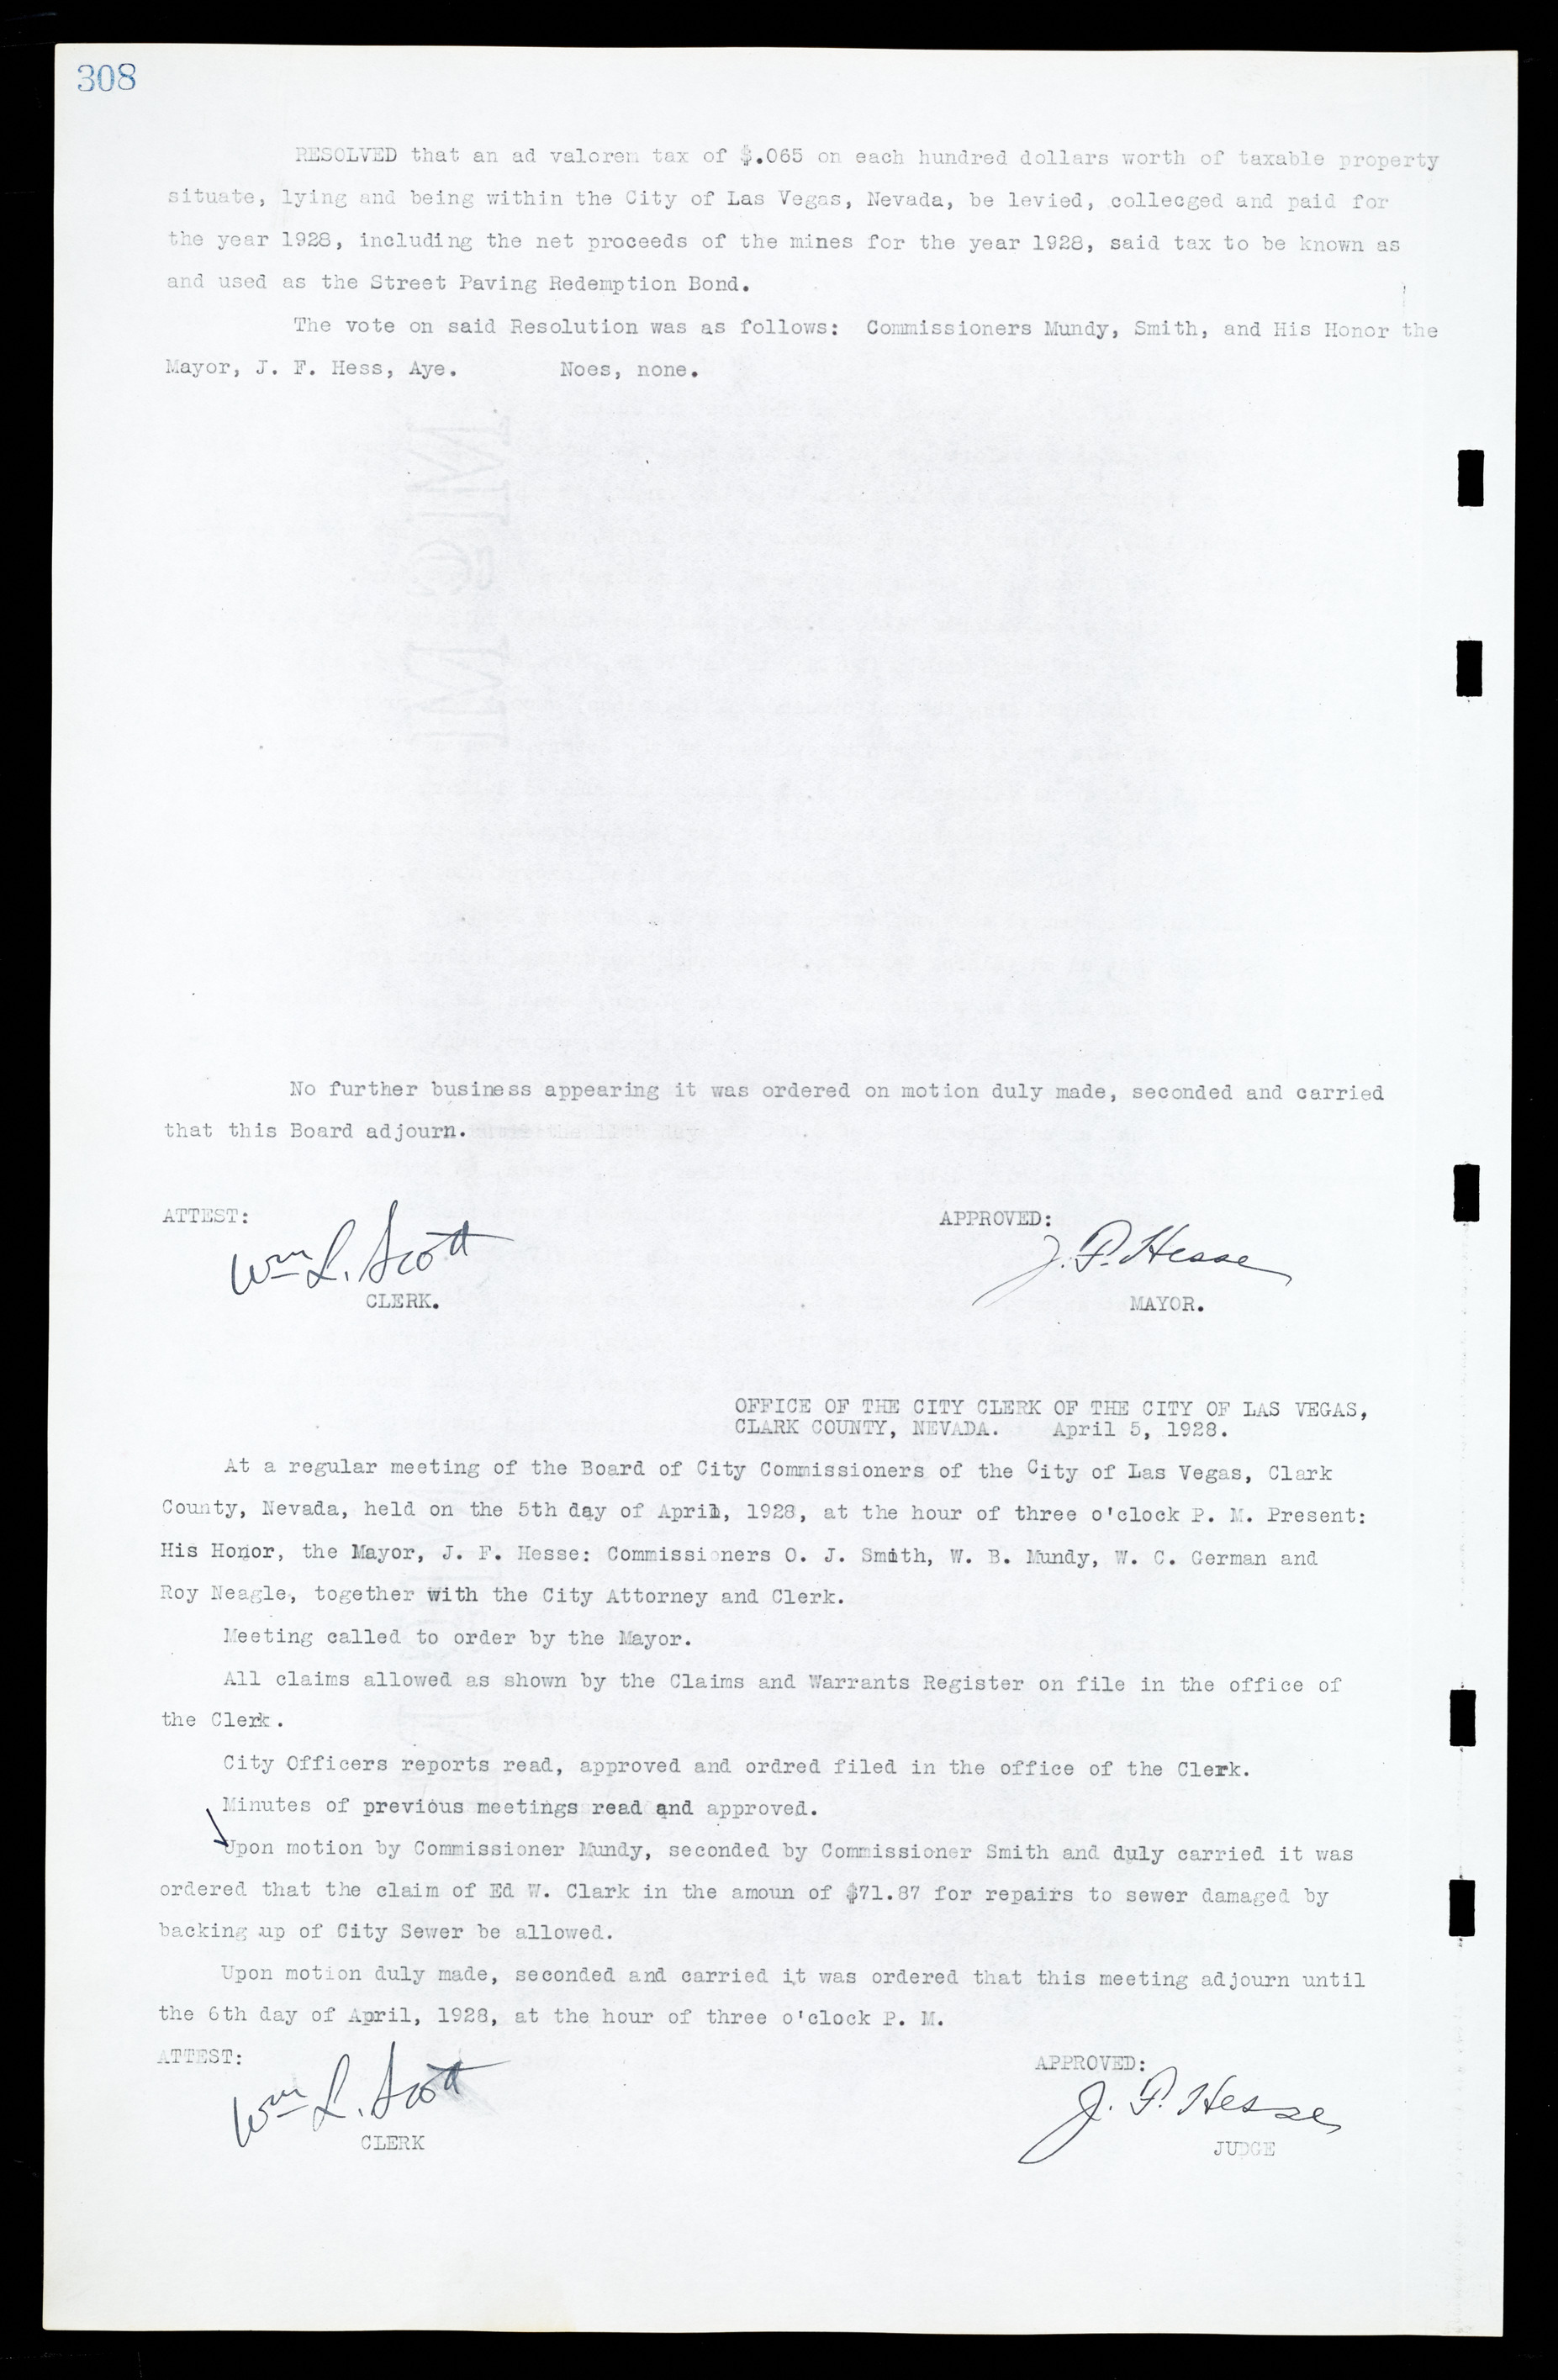 Las Vegas City Commission Minutes, March 1, 1922 to May 10, 1929, lvc000002-317